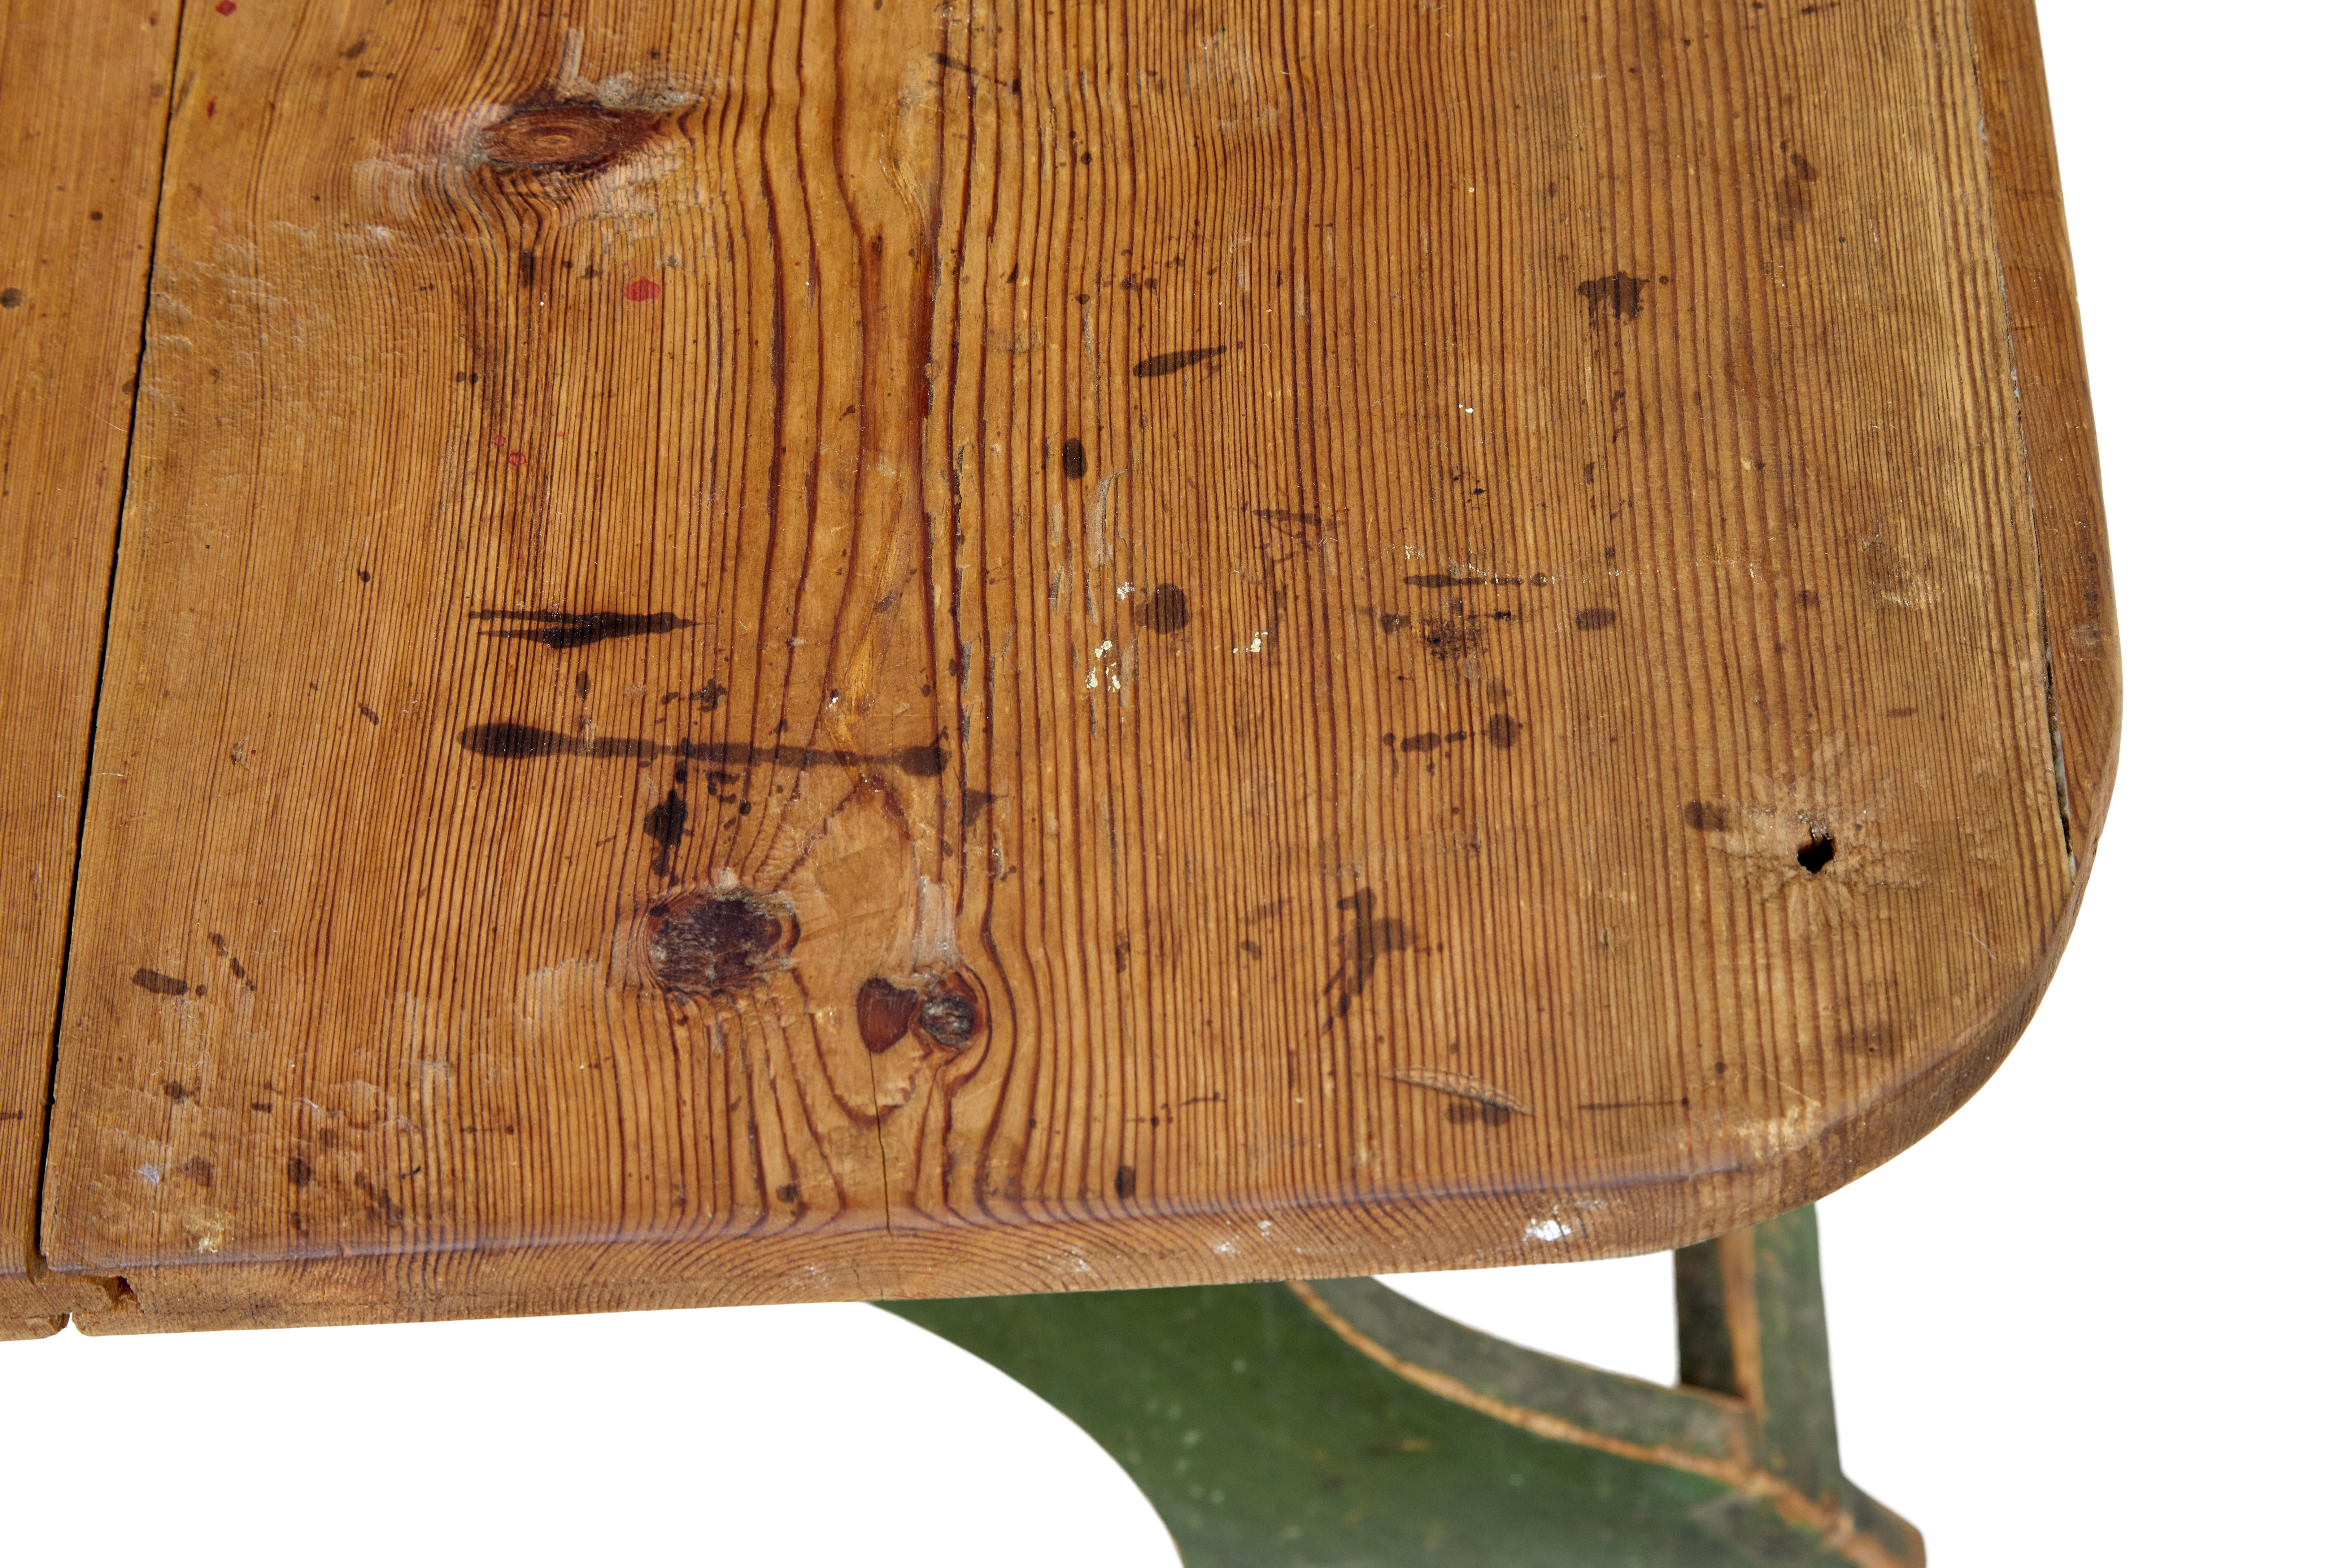 19th Century Painted Pine Swedish Trestle Table In Fair Condition For Sale In Debenham, Suffolk